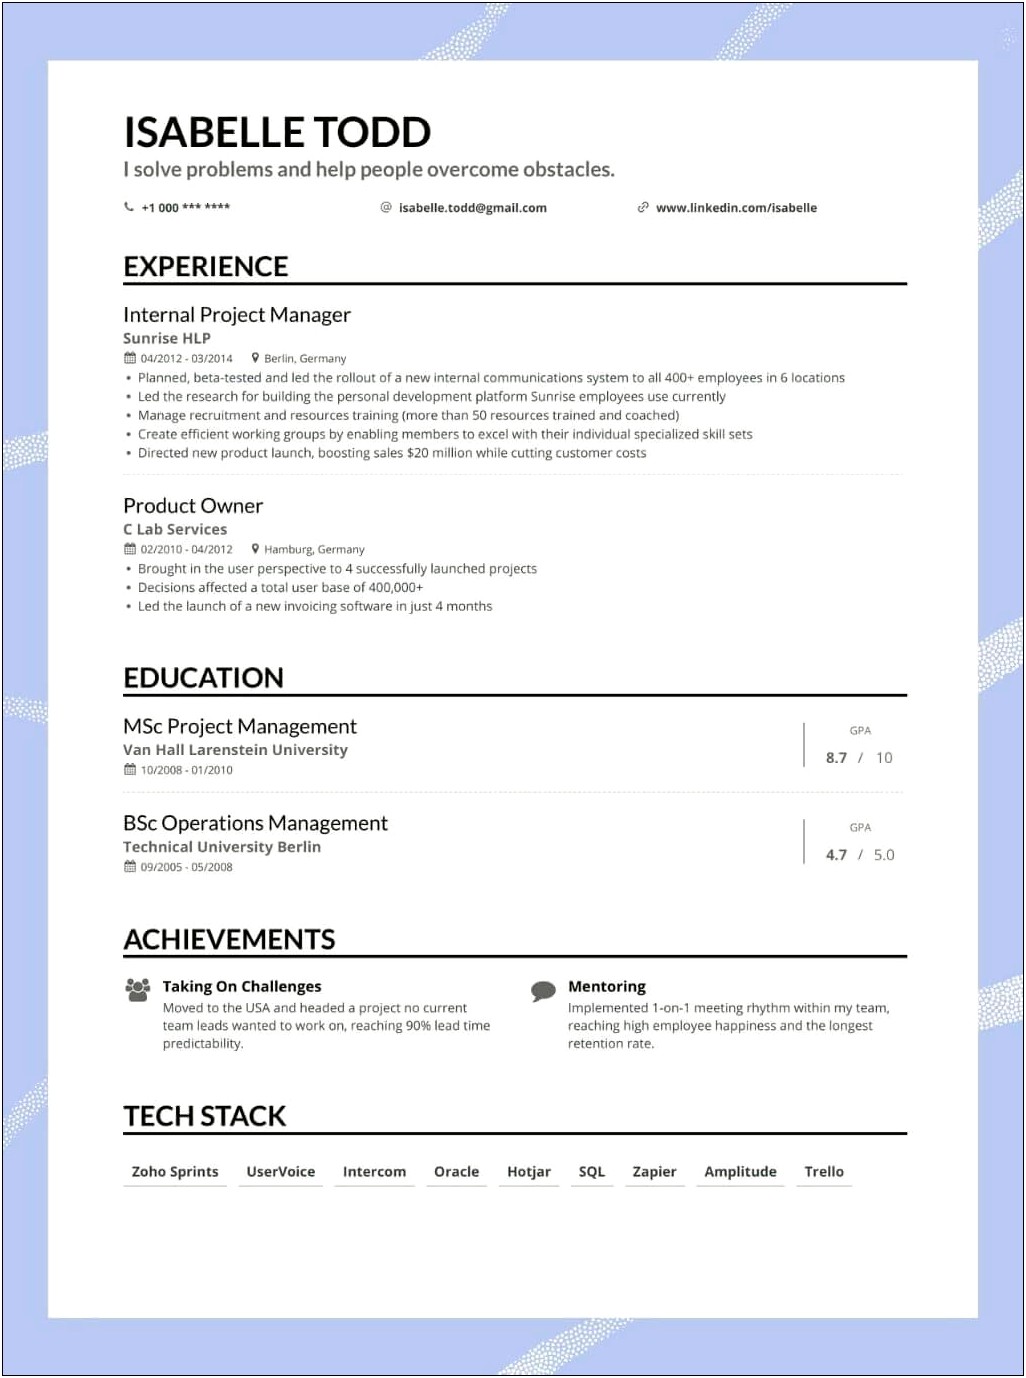 Resume Experience In Past Or Present Tense